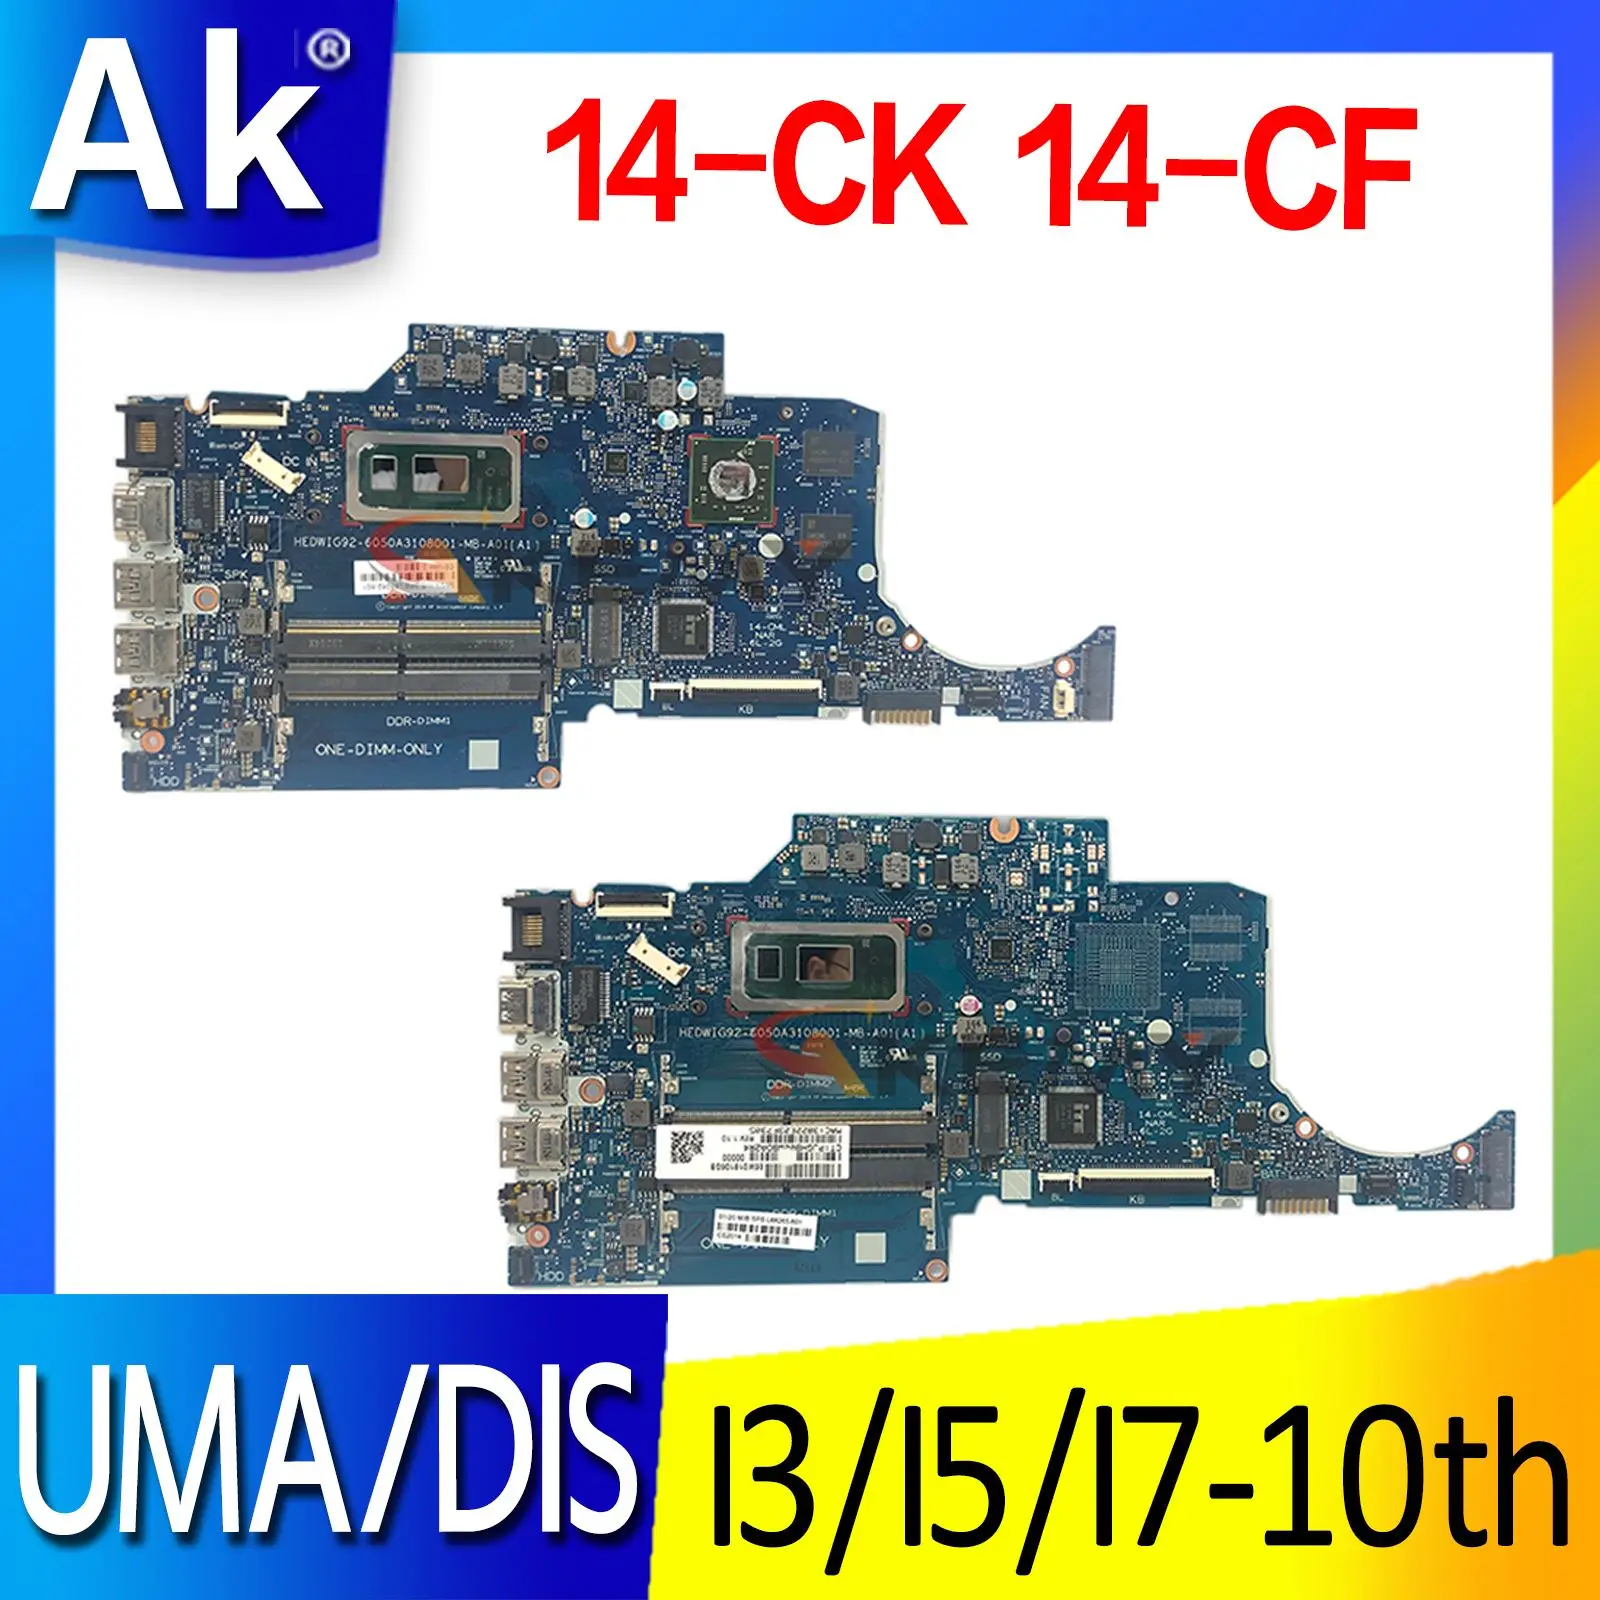 

For HP 14-CK 14-CF 14-CR 14S-CF 14S-CR 240 G7 laptop motherboard mainboard 6050A3108001 motherboard I3 I5 I7 10th Gen CPU V2G